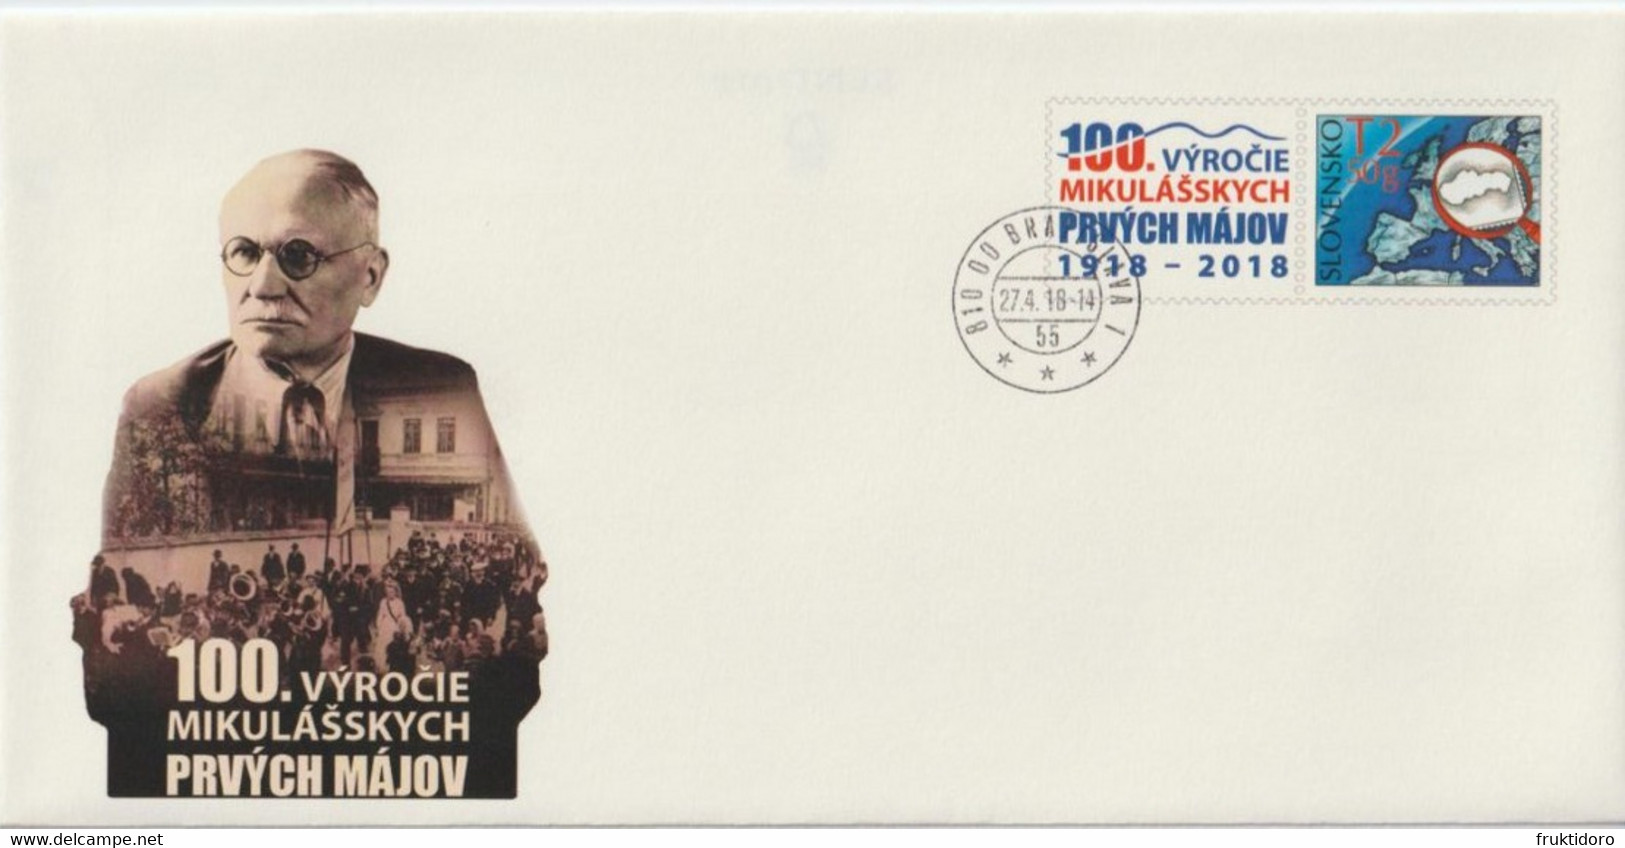 Slovakia Postal Stationery - 100th Anniversary Of The May 1st In L. Mikuláš - 2018 - Map - Magnifying Glass - Briefe